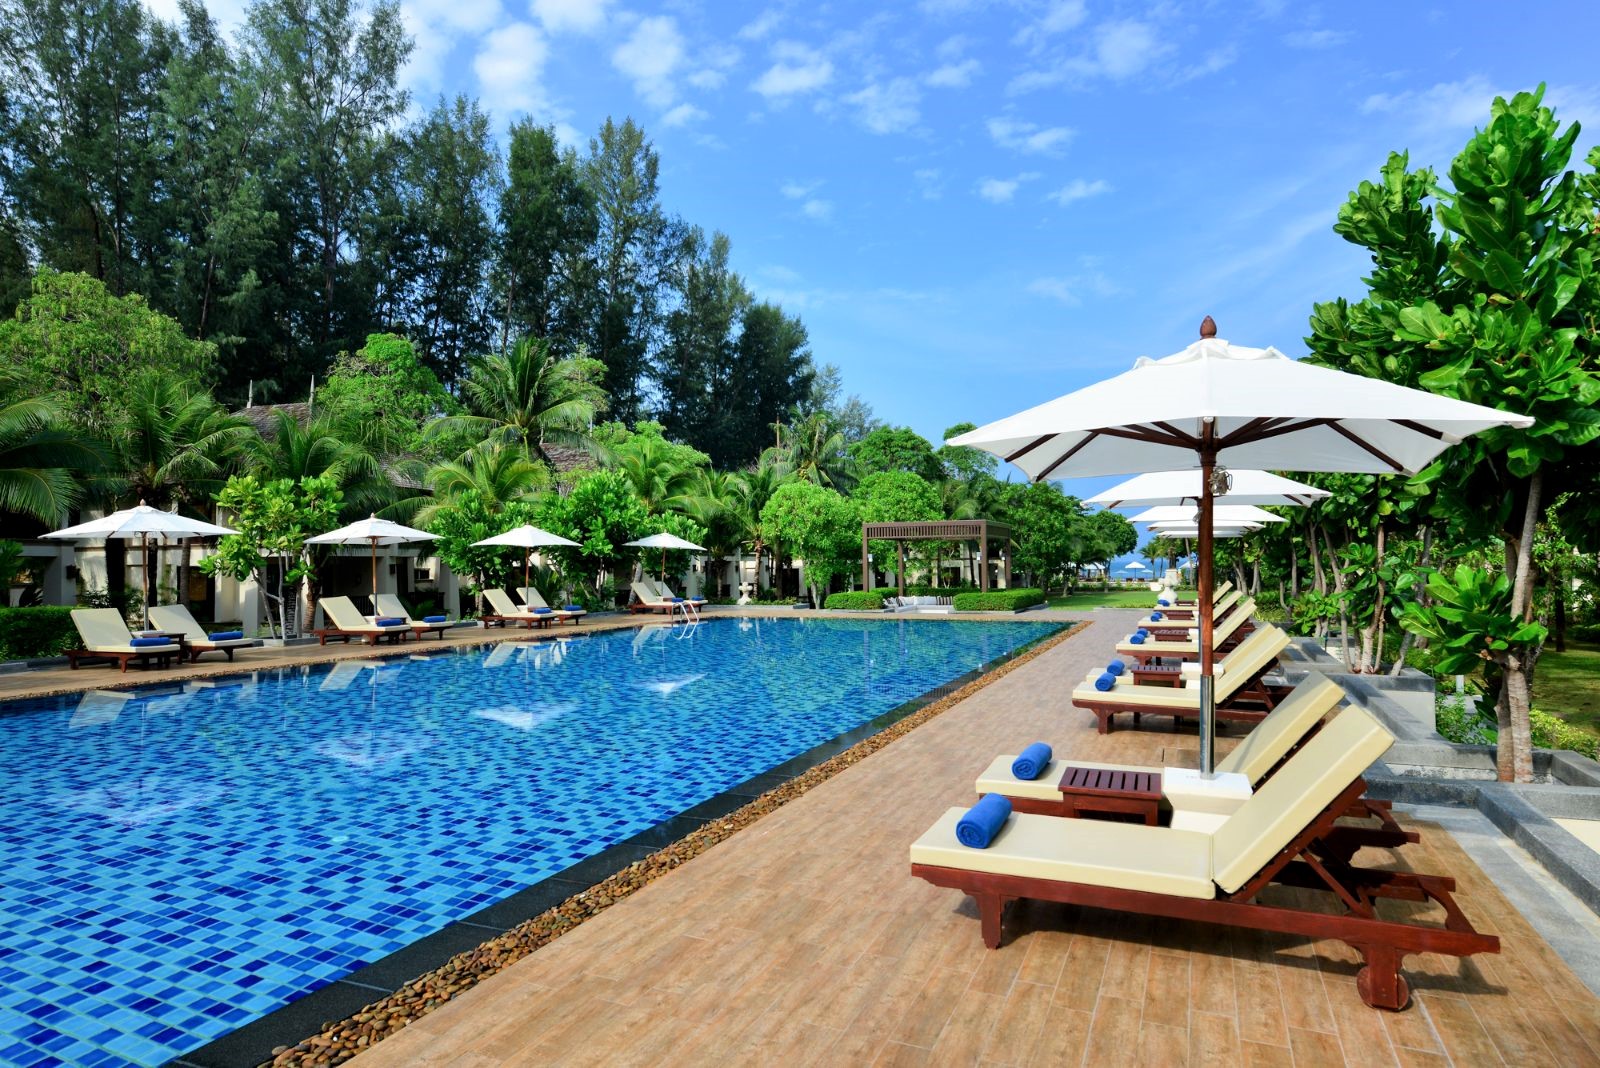 Pool and loungers at Layana Resort & Spa in the Koh Lanta region of Thailand